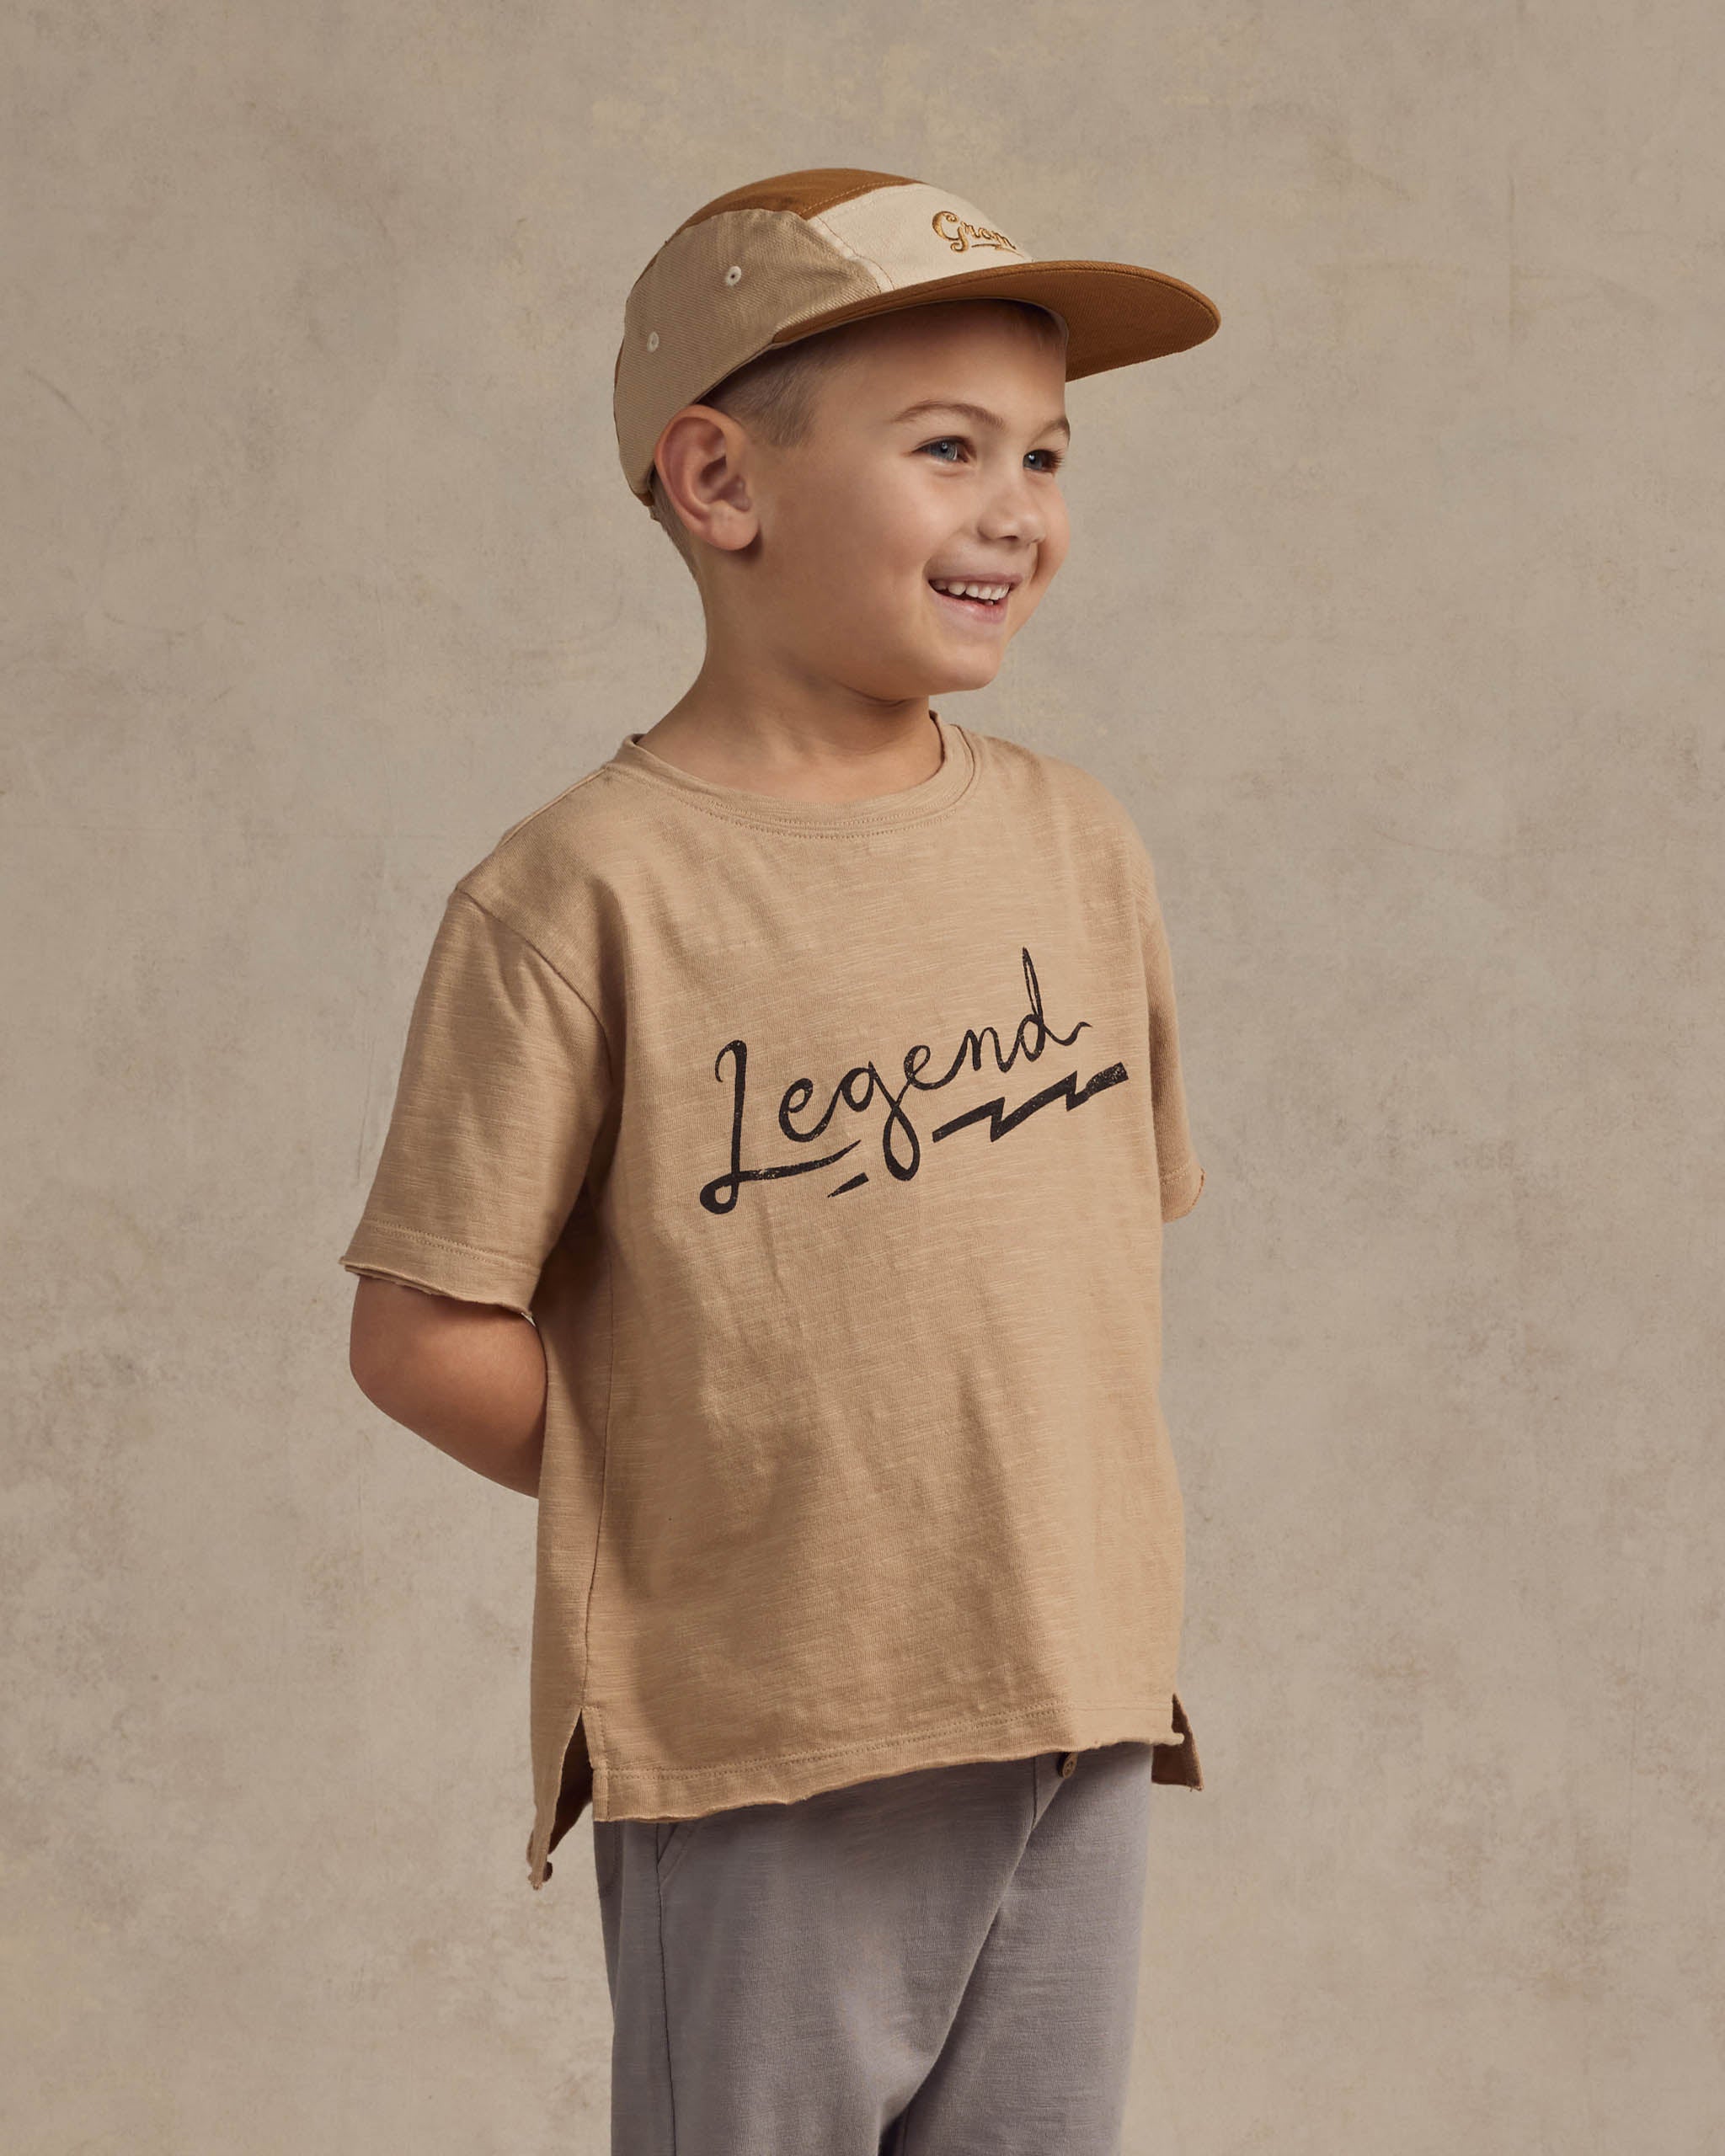 Raw Edge Tee || Legend - Rylee + Cru | Kids Clothes | Trendy Baby Clothes | Modern Infant Outfits |